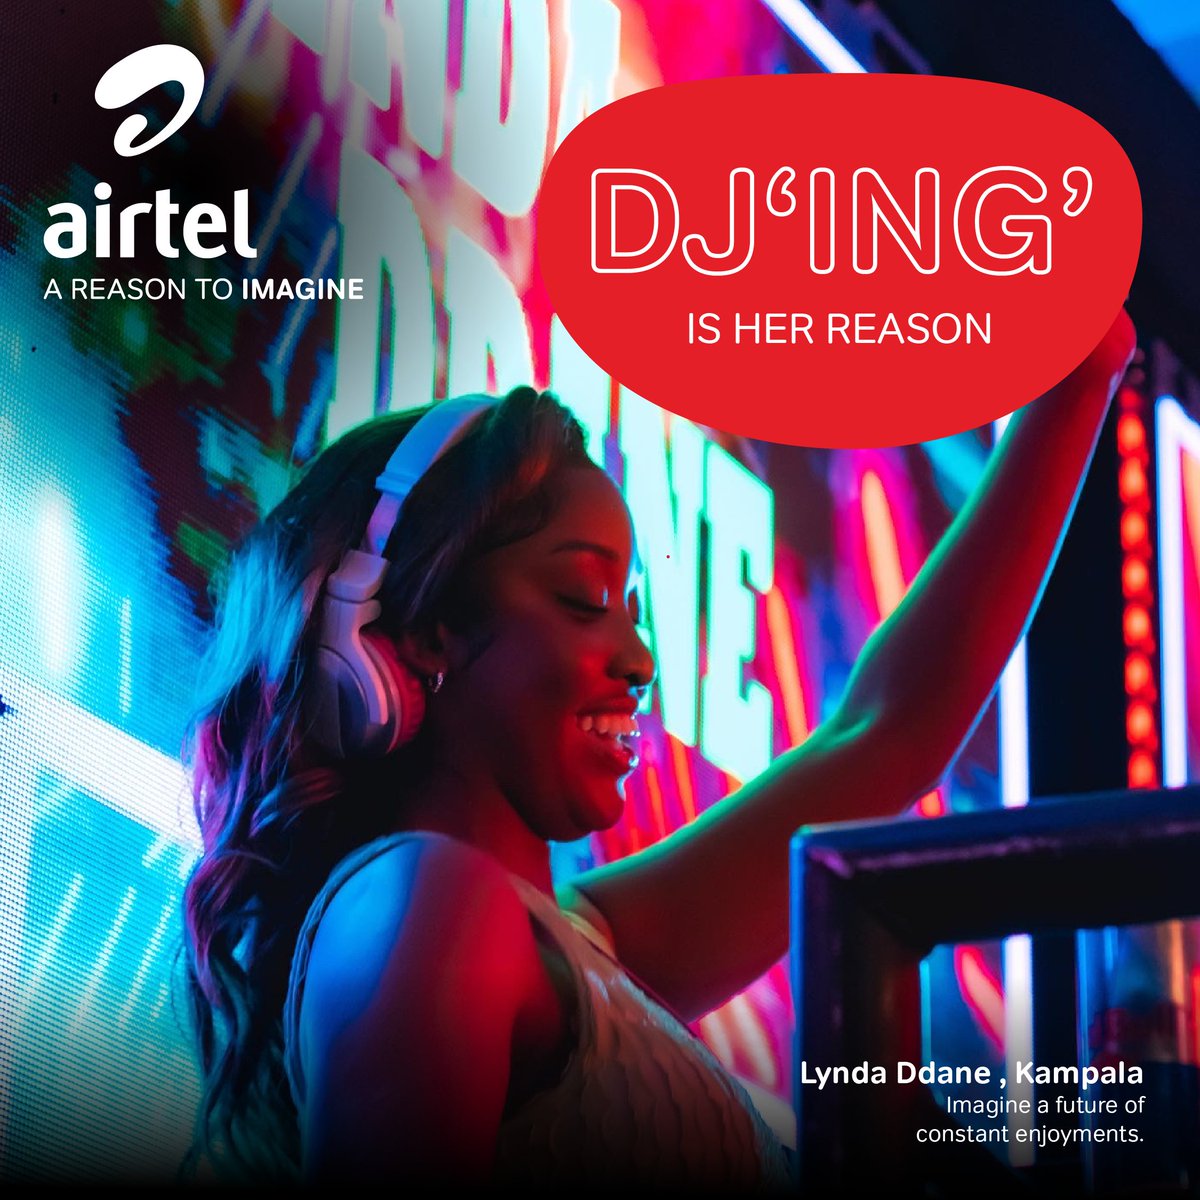 This week, we're crushing on @lynda_ddane. Her reason to imagine is DJ'ing.

What ignites your imagination?

Share your #AReasonToImagine with us!